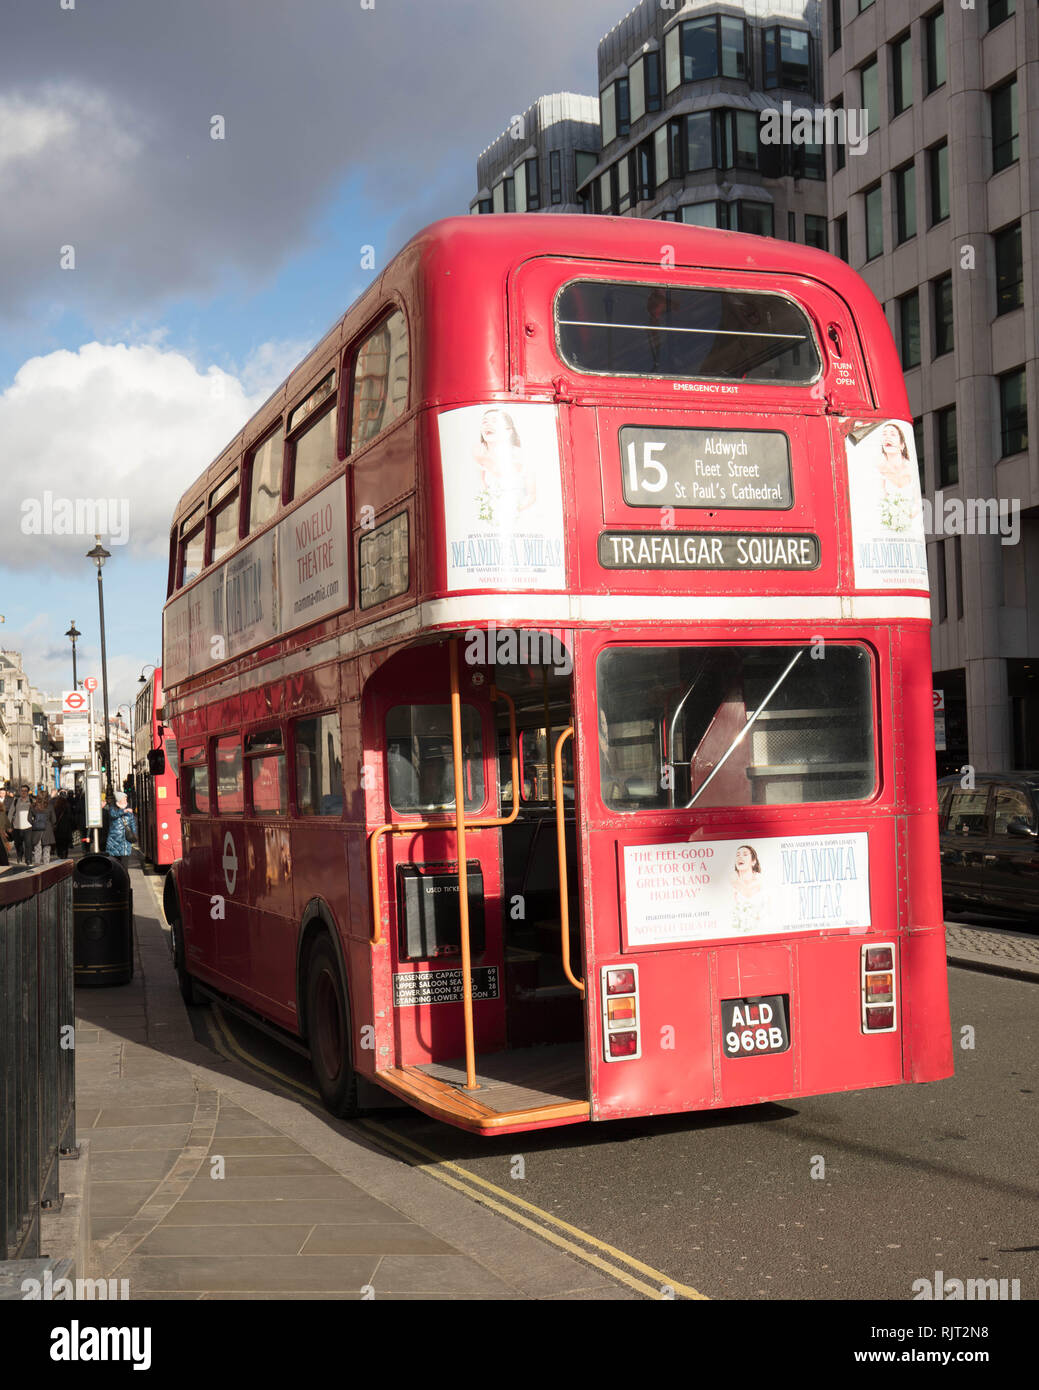 London, UK. 7th February 2019. Heritage Bus of Route 15, here near Trafalgar Square, London, will stop running as from the 2nd March 2019, after many years of service. Credit: Joe Kuis / Alamy Live News Stock Photo